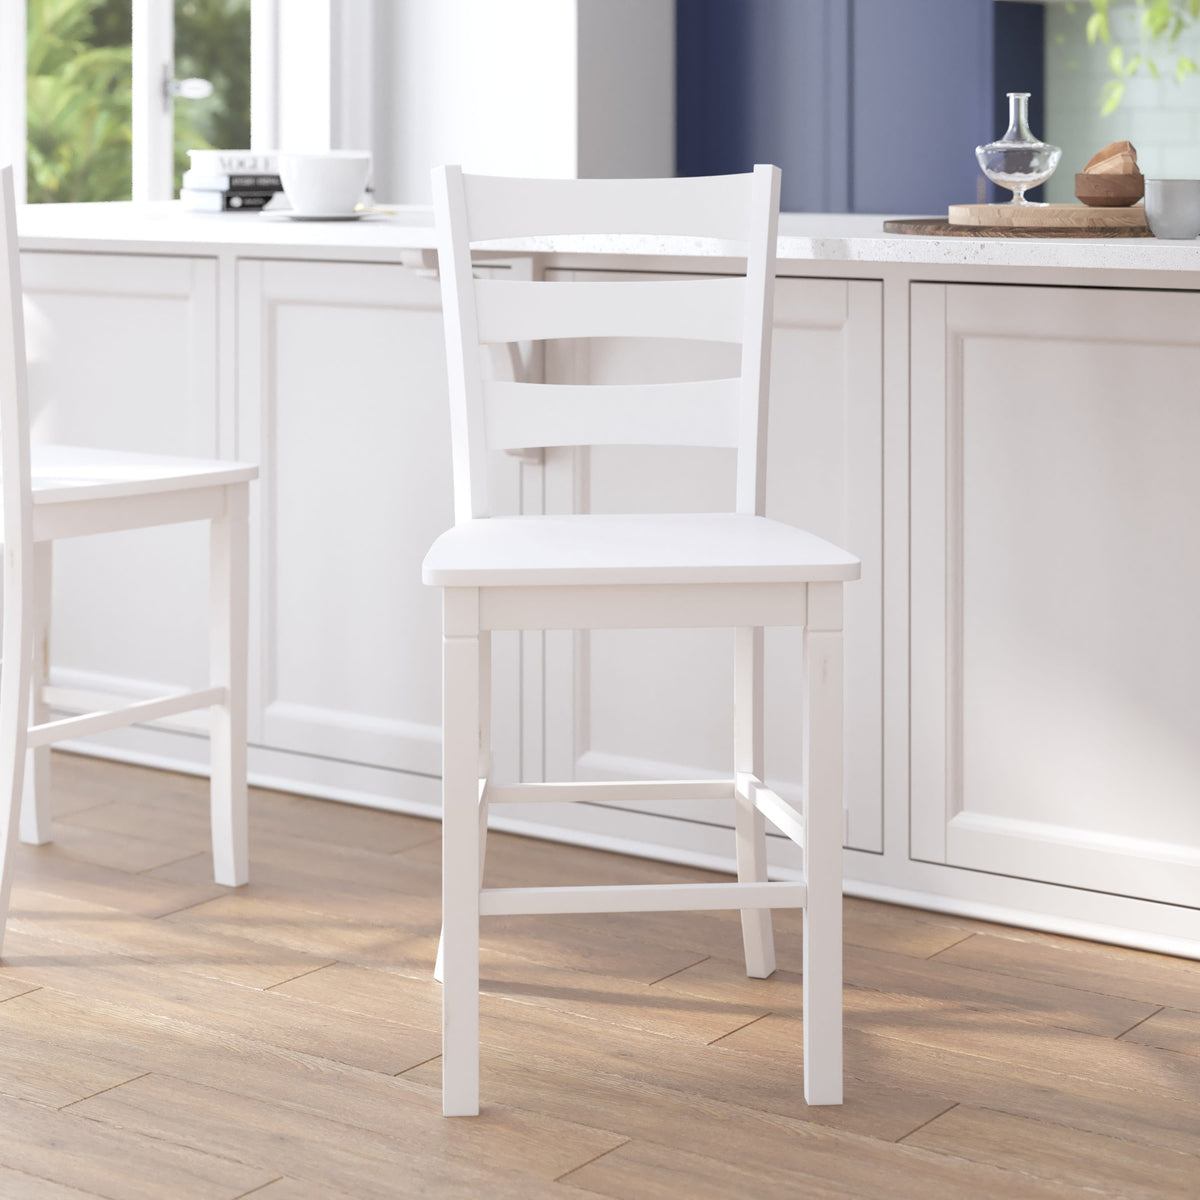 White Wash |#| Commercial Grade Wooden Counter Height Stool in Antique White Wash, Set of 2